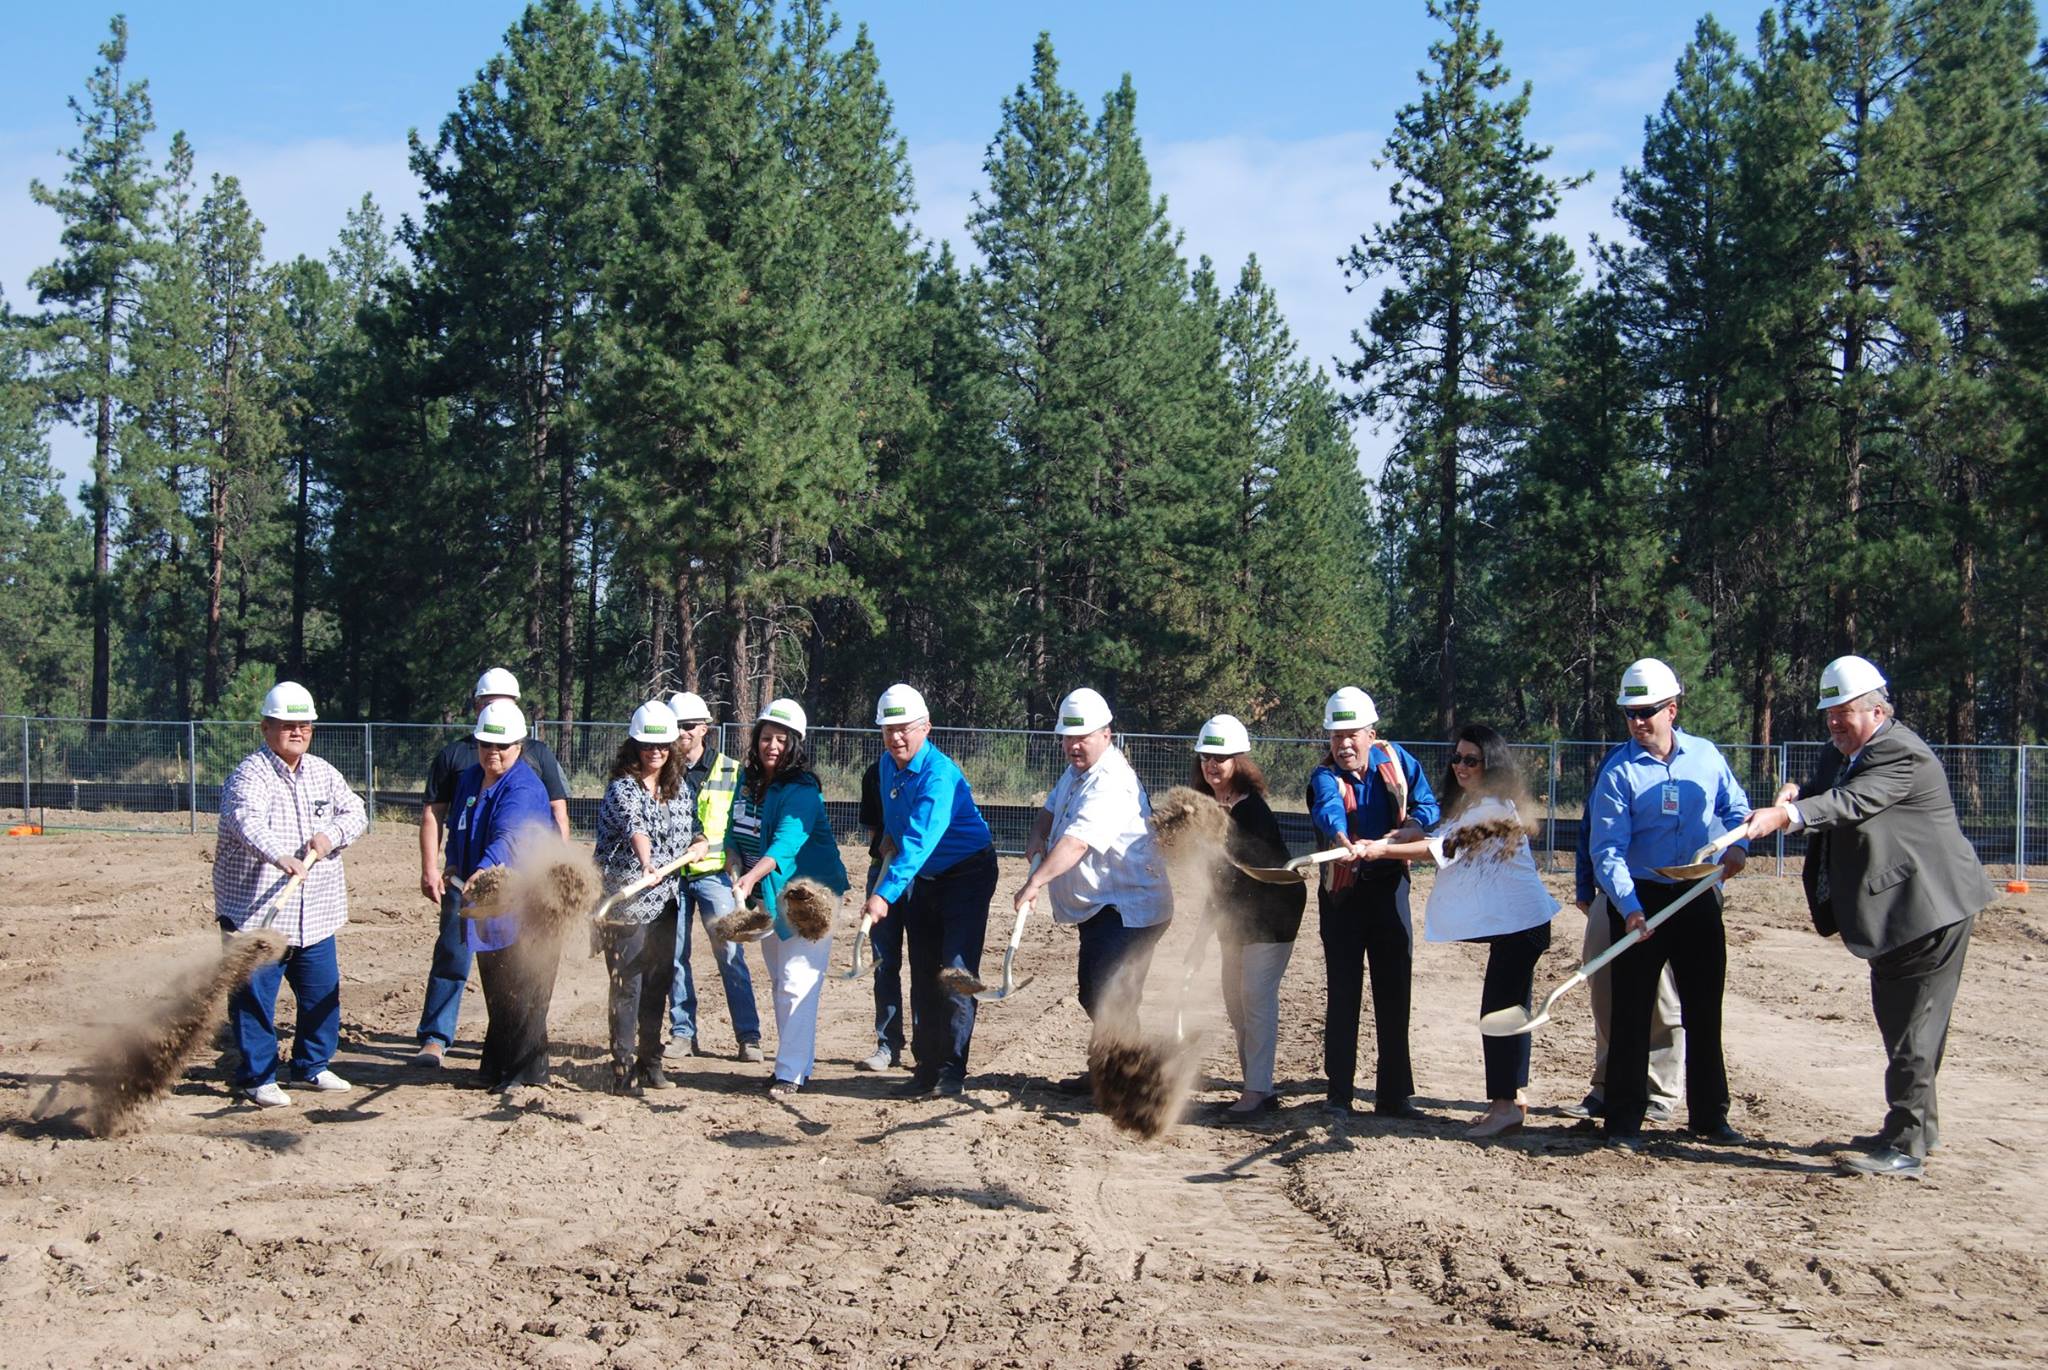 Klamath Tribes break ground on hotel as part of long-term casino expansion